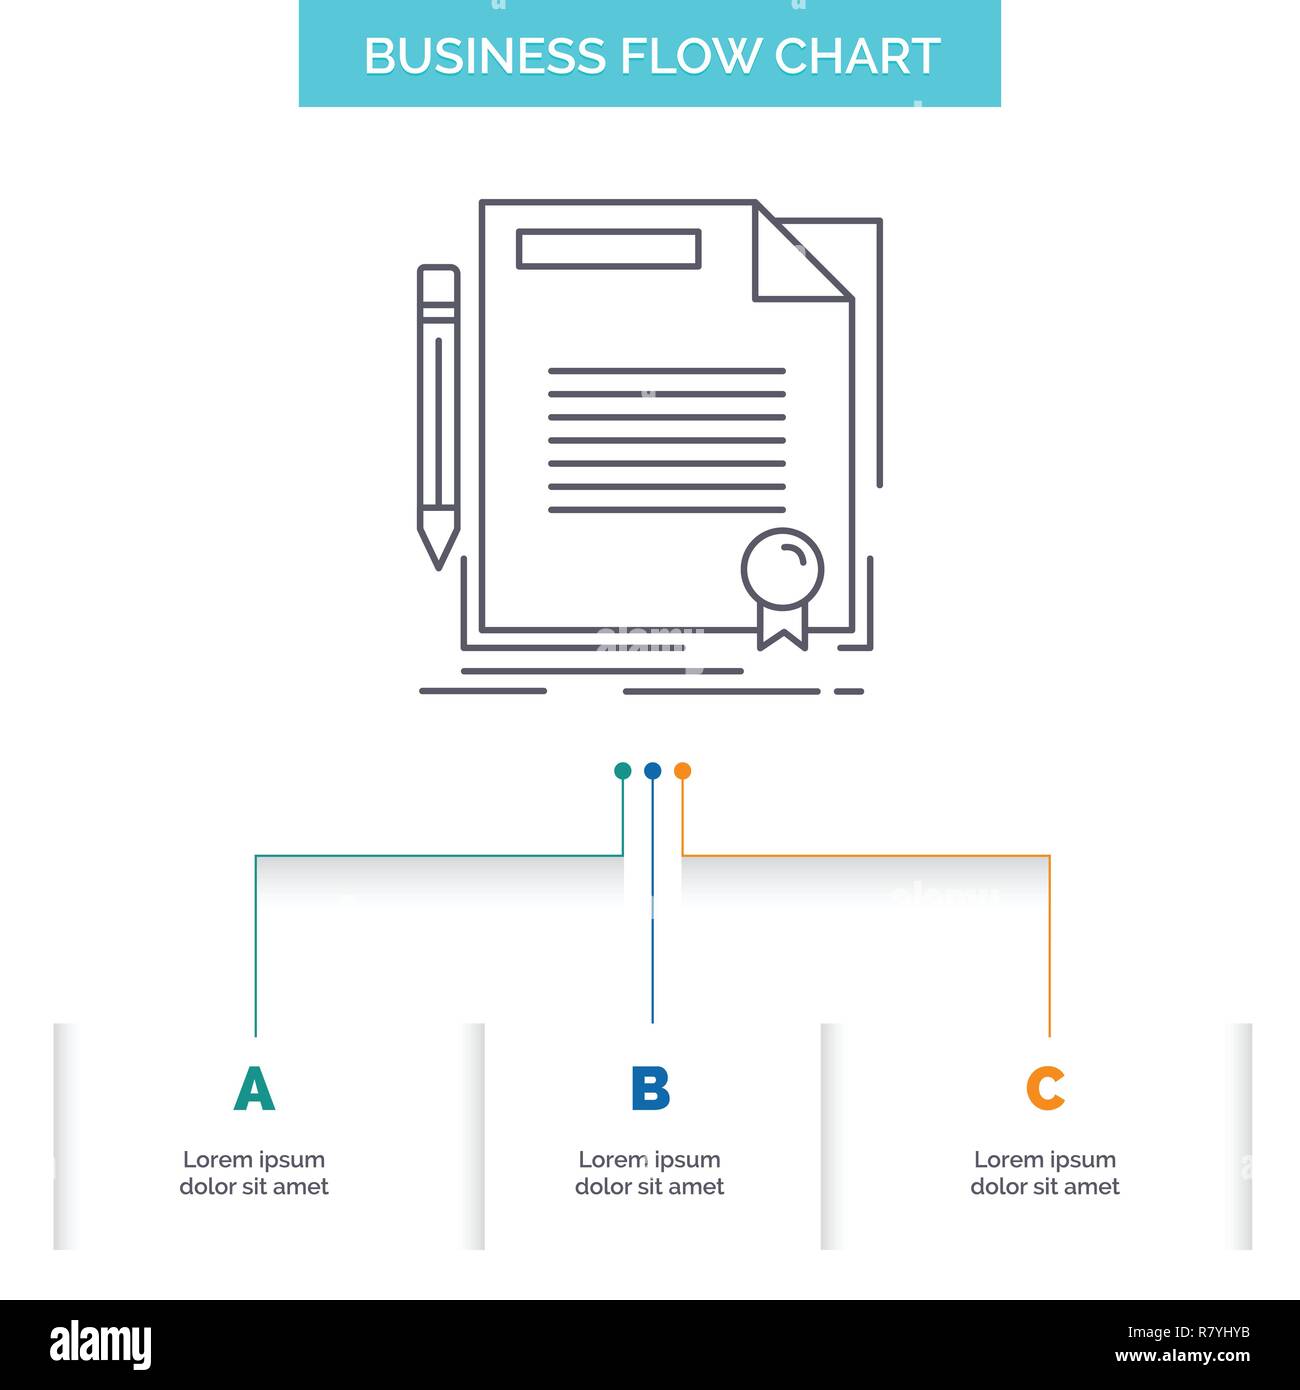 Steps In Business Writing Flow Chart